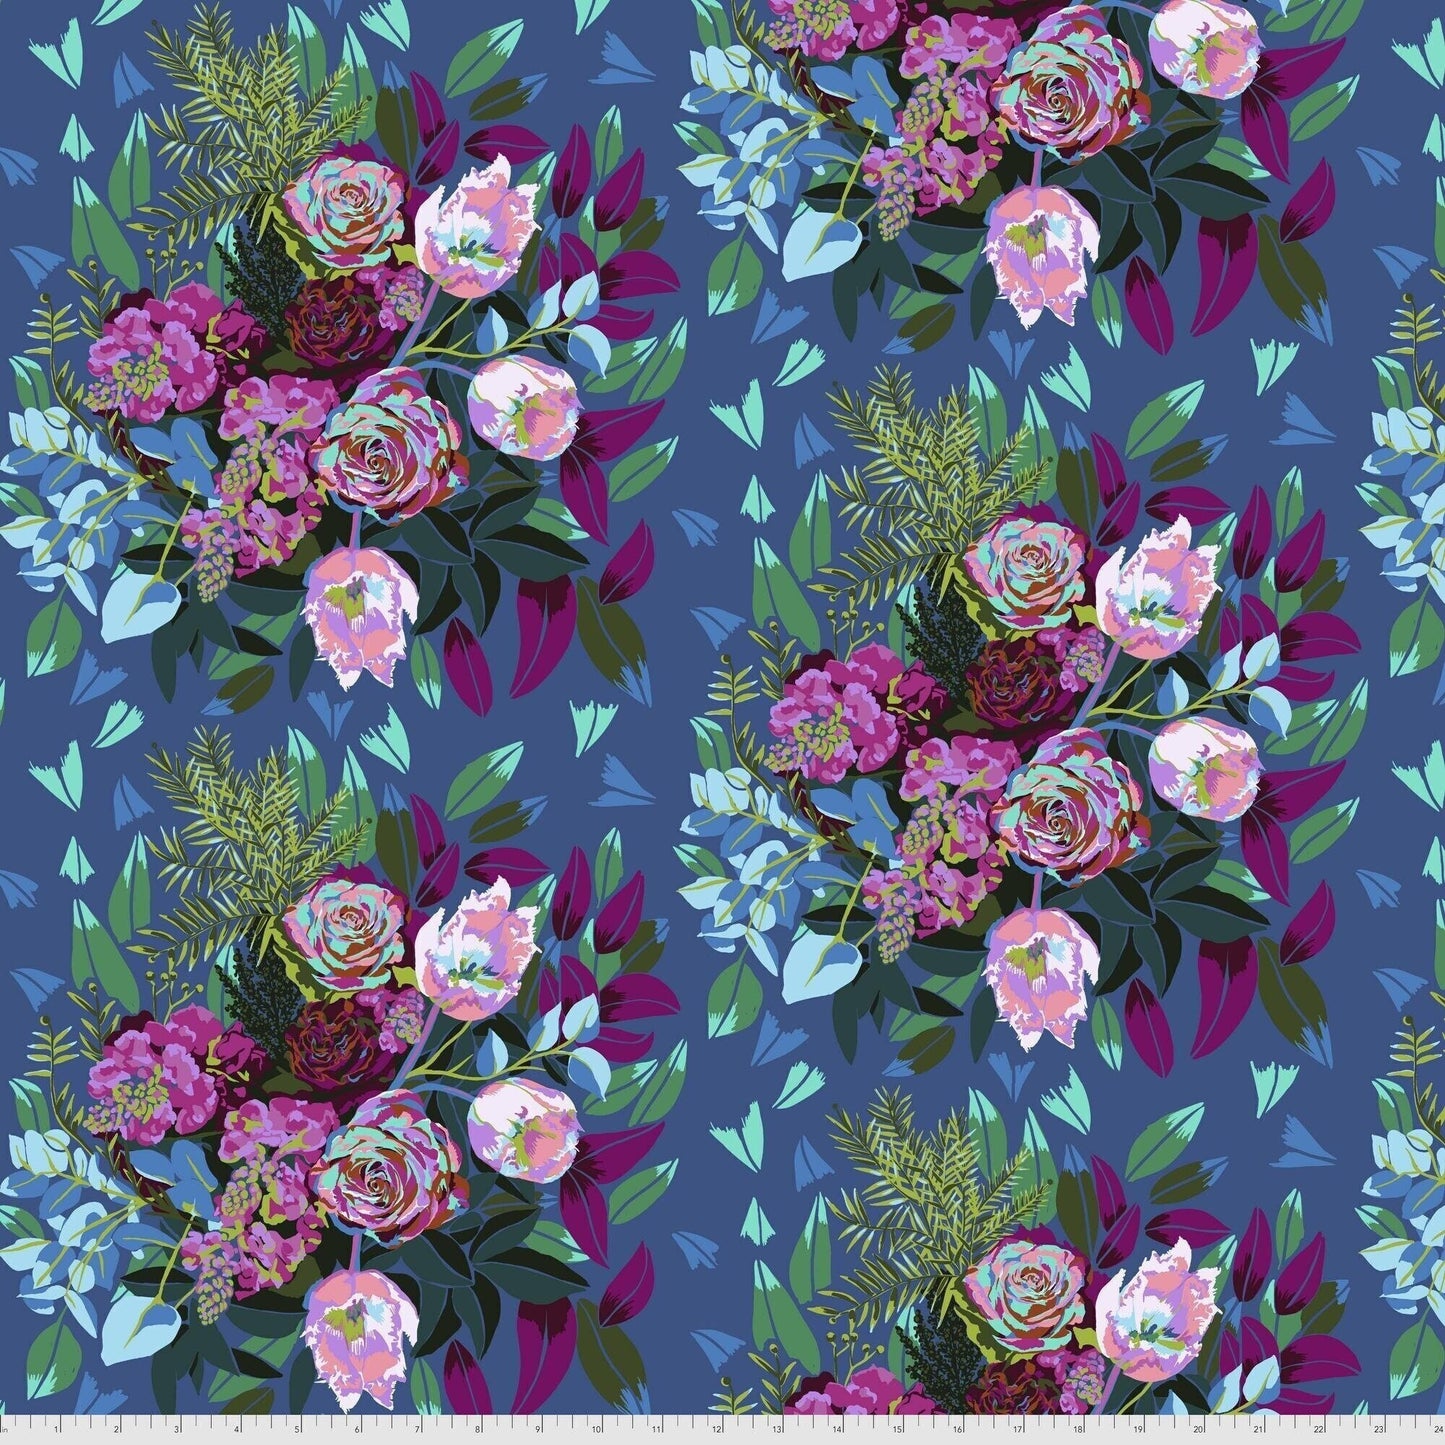 Made My Day NEW FLAME DEEPLY Pwah167 Anna Maria Horner, Free Spirit Fabrics, Quilt Fabric, Floral Fabric, Cotton Fabric, Fabric By The Yard